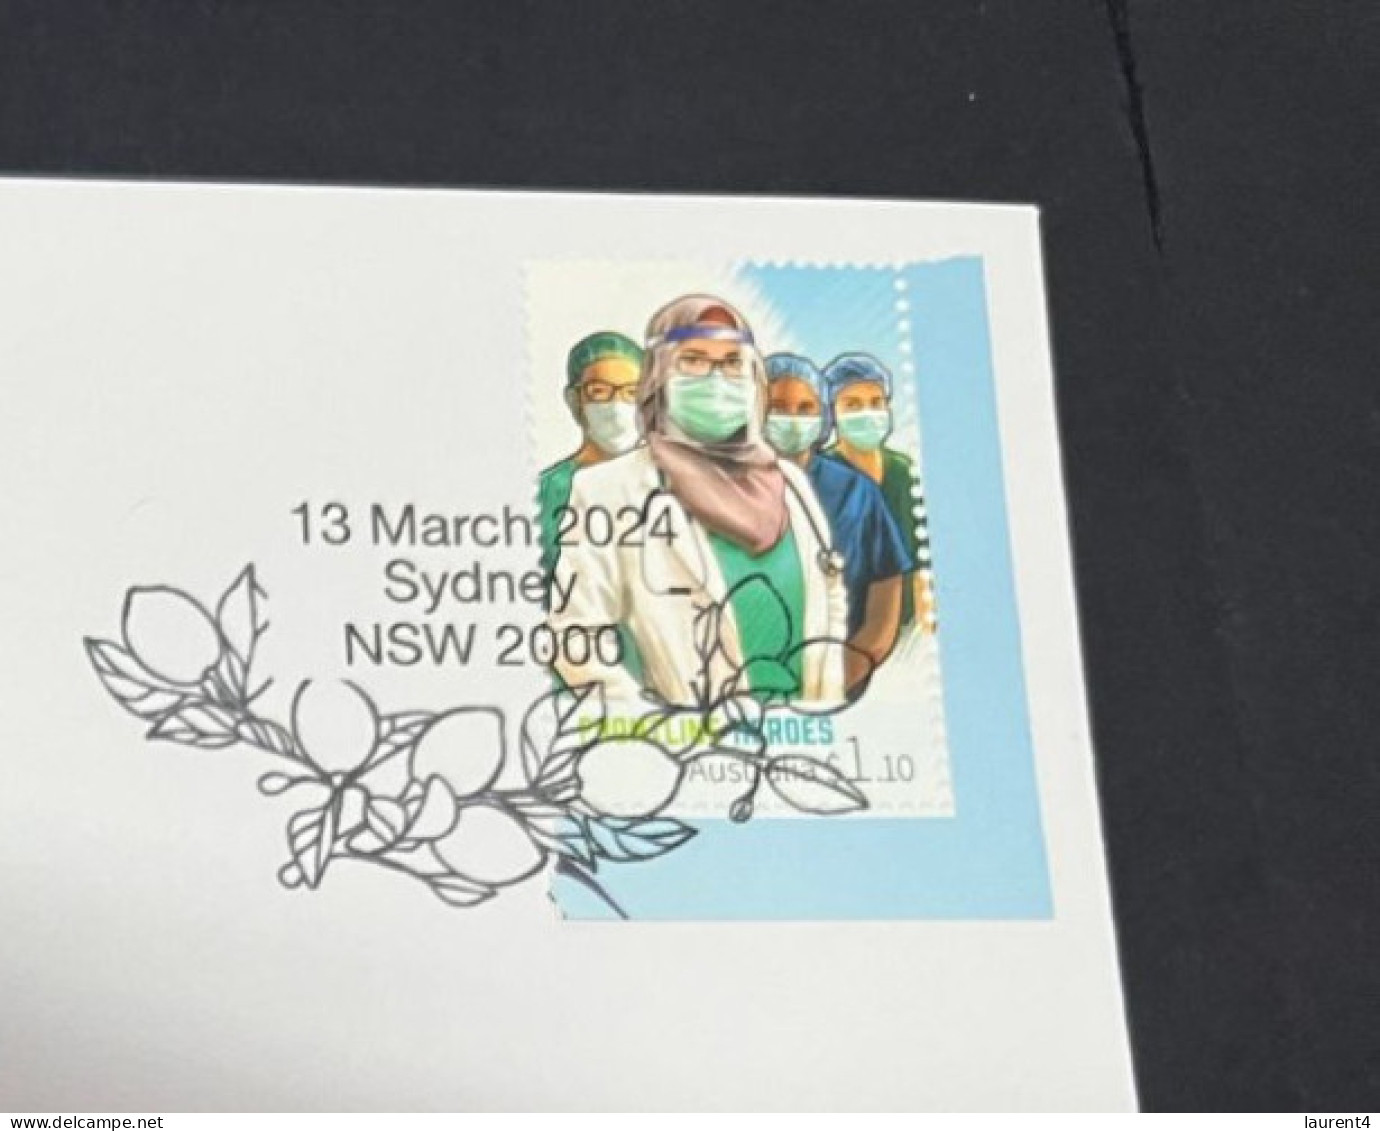 13-3-2024 (2 Y 52) COVID-19 4th Anniversary - Cayman Islands (UK) - 13 March 2024 (with OZ COVID-19 Doctor Stamp) - Disease